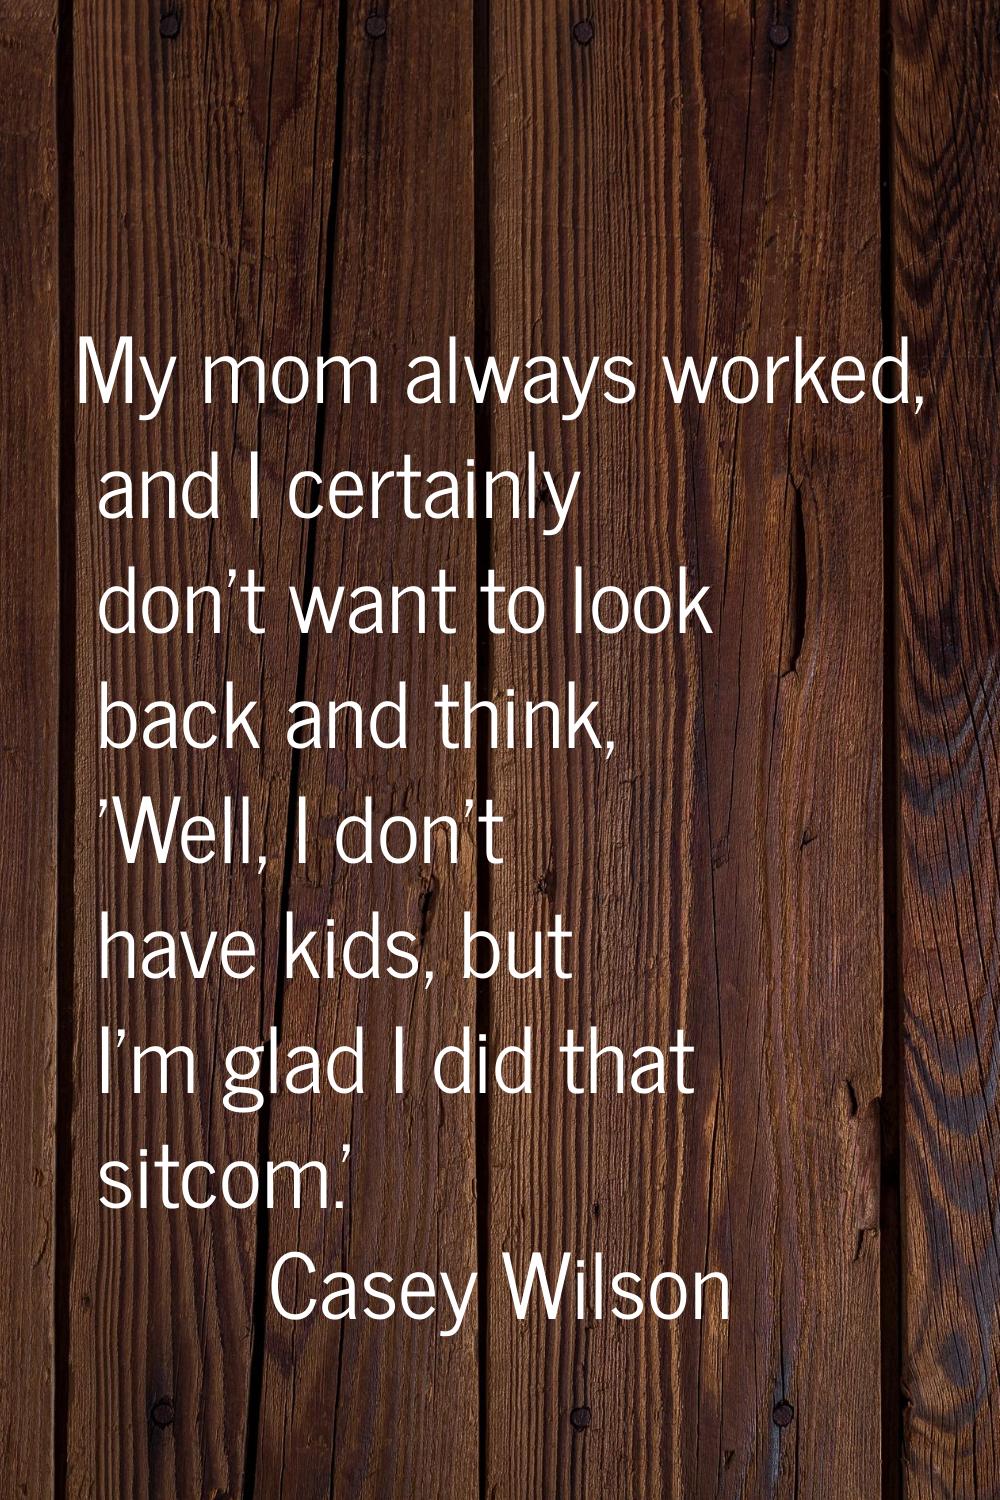 My mom always worked, and I certainly don't want to look back and think, 'Well, I don't have kids, 